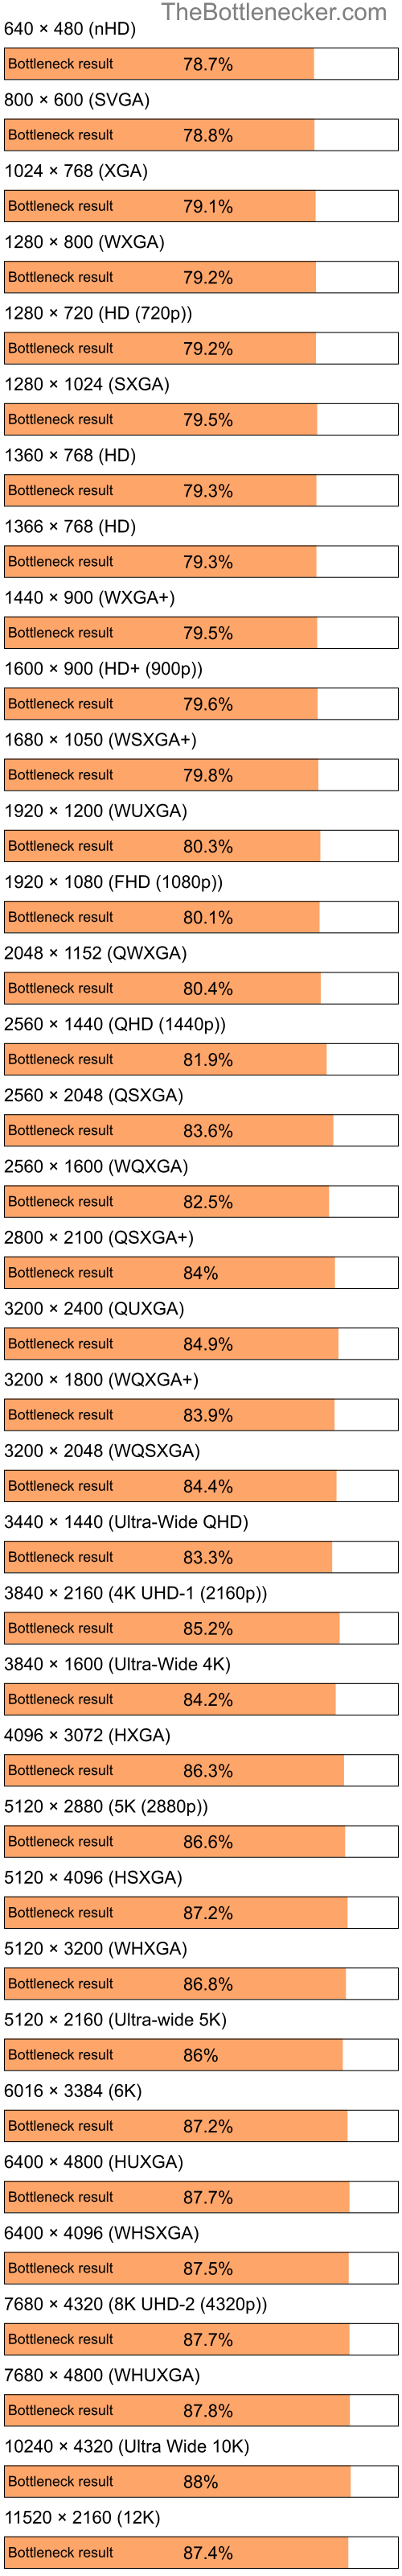 Bottleneck results by resolution for Intel Atom Z520 and NVIDIA GeForce Go 7200 in Graphic Card Intense Tasks